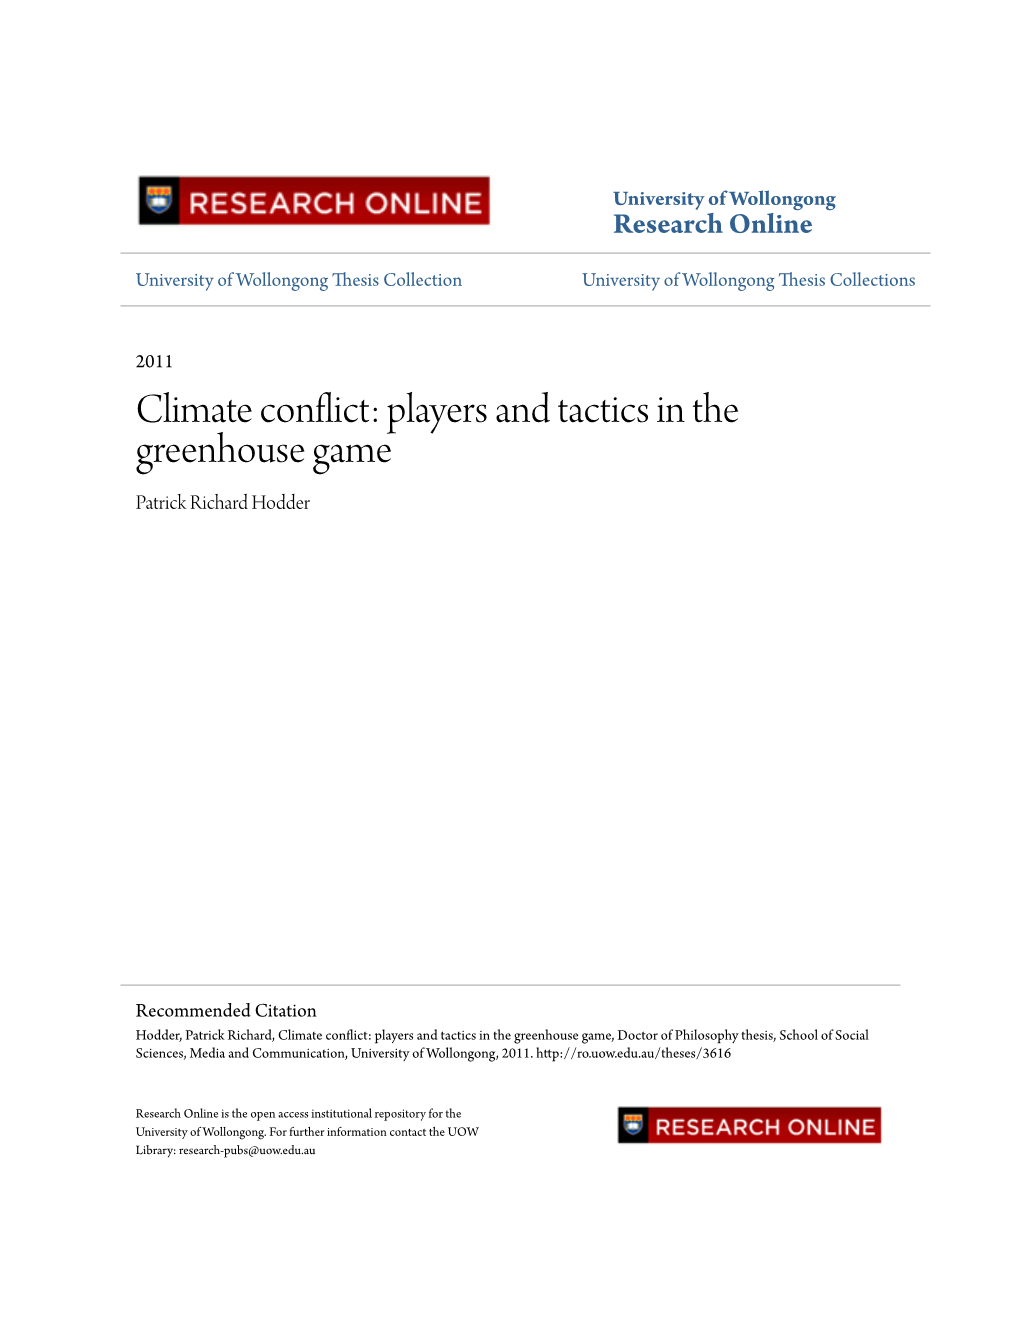 Climate Conflict: Players and Tactics in the Greenhouse Game Patrick Richard Hodder